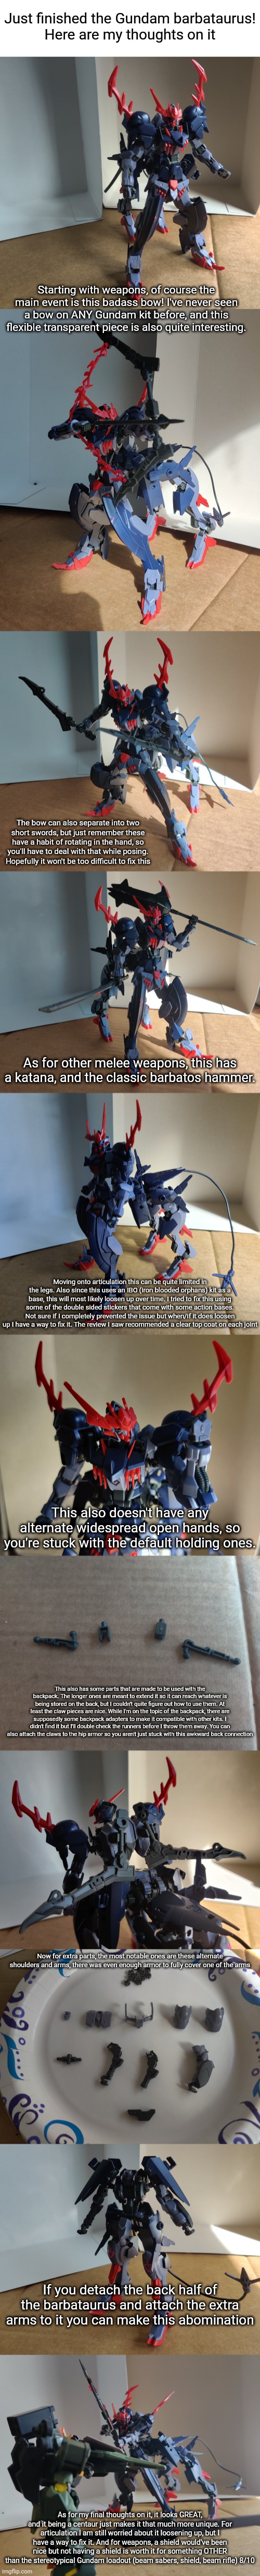 I was looking at this back when I built the ver. ka, would've been 50 dollars if I got it back then and I got it for 30 at hobby | Just finished the Gundam barbataurus!
Here are my thoughts on it; Starting with weapons, of course the main event is this badass bow! I've never seen a bow on ANY Gundam kit before, and this flexible transparent piece is also quite interesting. The bow can also separate into two short swords, but just remember these have a habit of rotating in the hand, so you'll have to deal with that while posing. Hopefully it won't be too difficult to fix this; As for other melee weapons, this has a katana, and the classic barbatos hammer. Moving onto articulation this can be quite limited in the legs. Also since this uses an IBO (iron blooded orphans) kit as a base, this will most likely loosen up over time. I tried to fix this using some of the double sided stickers that come with some action bases. Not sure if I completely prevented the issue but when/if it does loosen up I have a way to fix it. The review I saw recommended a clear top coat on each joint; This also doesn't have any alternate widespread open hands, so you're stuck with the default holding ones. This also has some parts that are made to be used with the backpack. The longer ones are meant to extend it so it can reach whatever is being stored on the back, but I couldn't quite figure out how to use them. At least the claw pieces are nice. While I'm on the topic of the backpack, there are supposedly some backpack adapters to make it compatible with other kits. I didn't find it but I'll double check the runners before I throw them away. You can also attach the claws to the hip armor so you aren't just stuck with this awkward back connection; Now for extra parts, the most notable ones are these alternate shoulders and arms, there was even enough armor to fully cover one of the arms; If you detach the back half of the barbataurus and attach the extra arms to it you can make this abomination; As for my final thoughts on it, it looks GREAT, and it being a centaur just makes it that much more unique. For articulation I am still worried about it loosening up, but I have a way to fix it. And for weapons, a shield would've been nice but not having a shield is worth it for something OTHER than the stereotypical Gundam loadout (beam sabers, shield, beam rifle) 8/10 | image tagged in blank white template | made w/ Imgflip meme maker